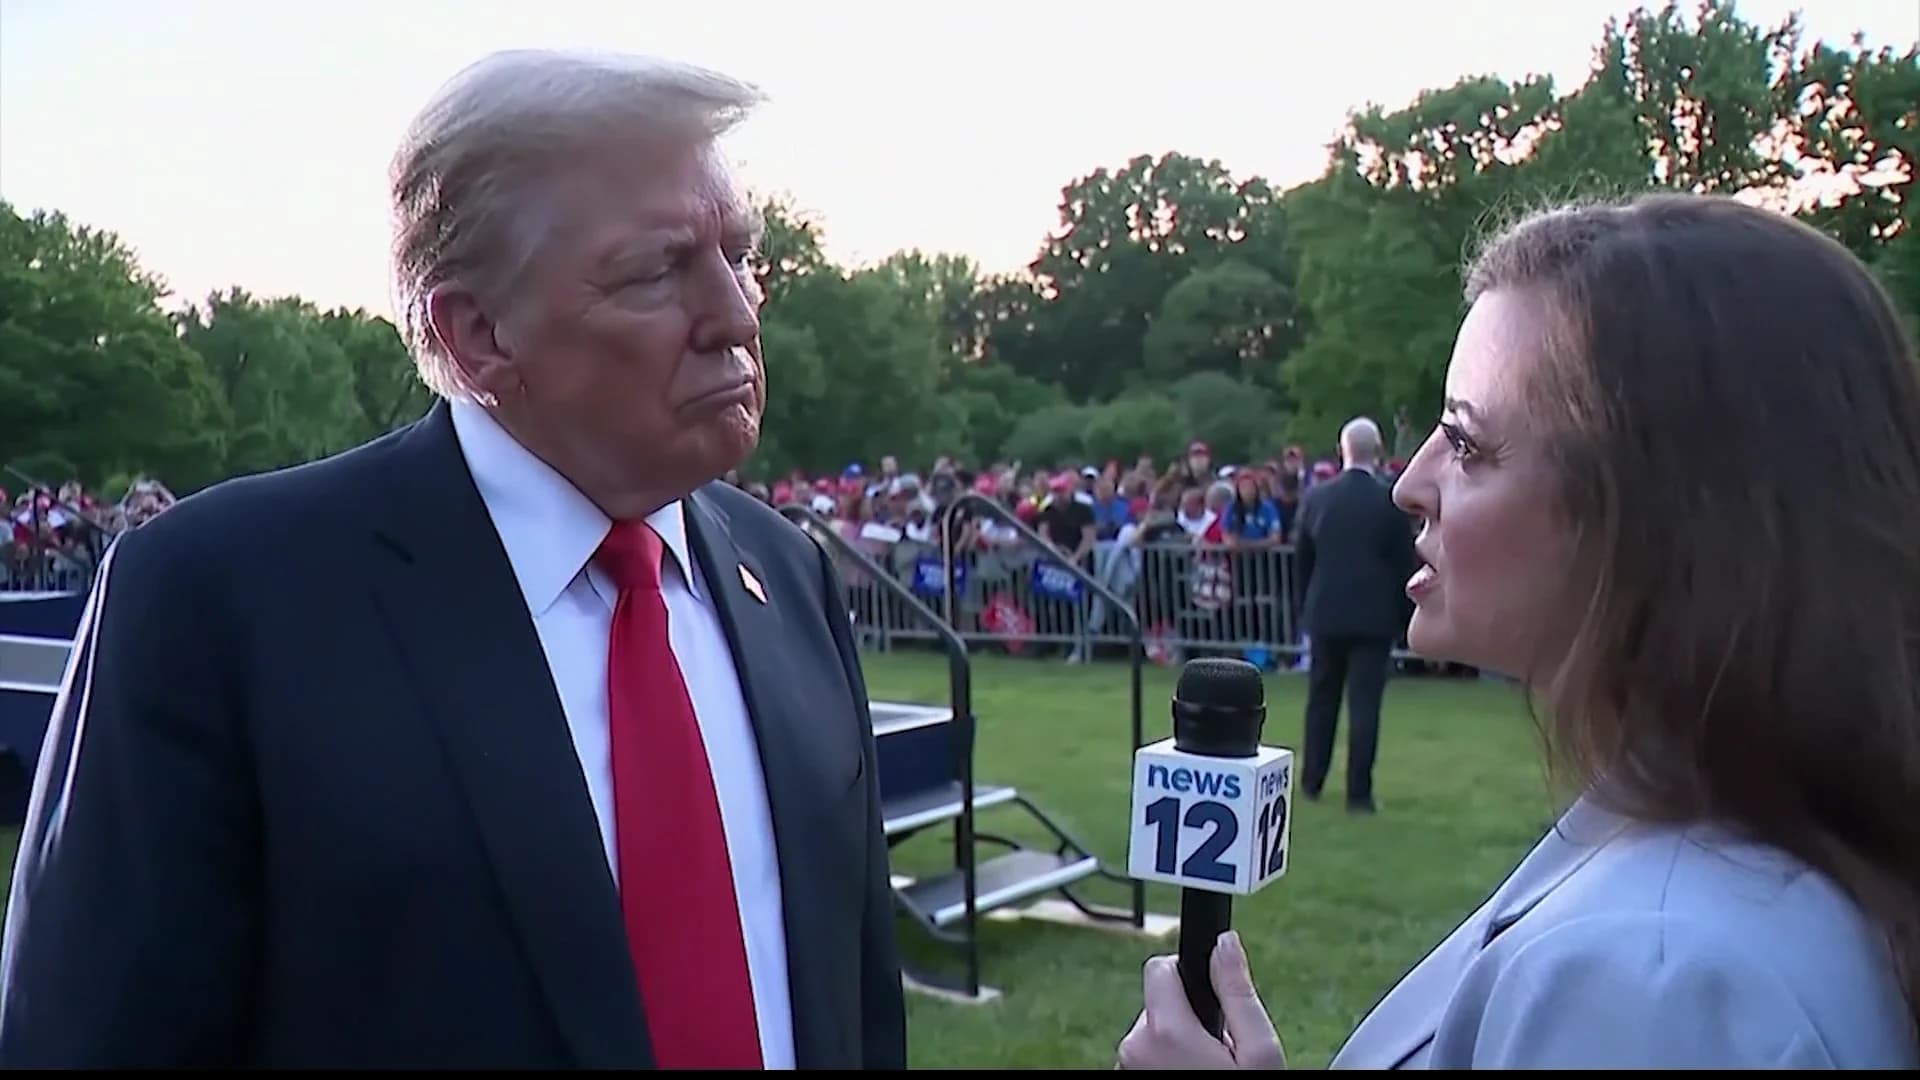 Former President Trump to speak with News 12 on range of issues